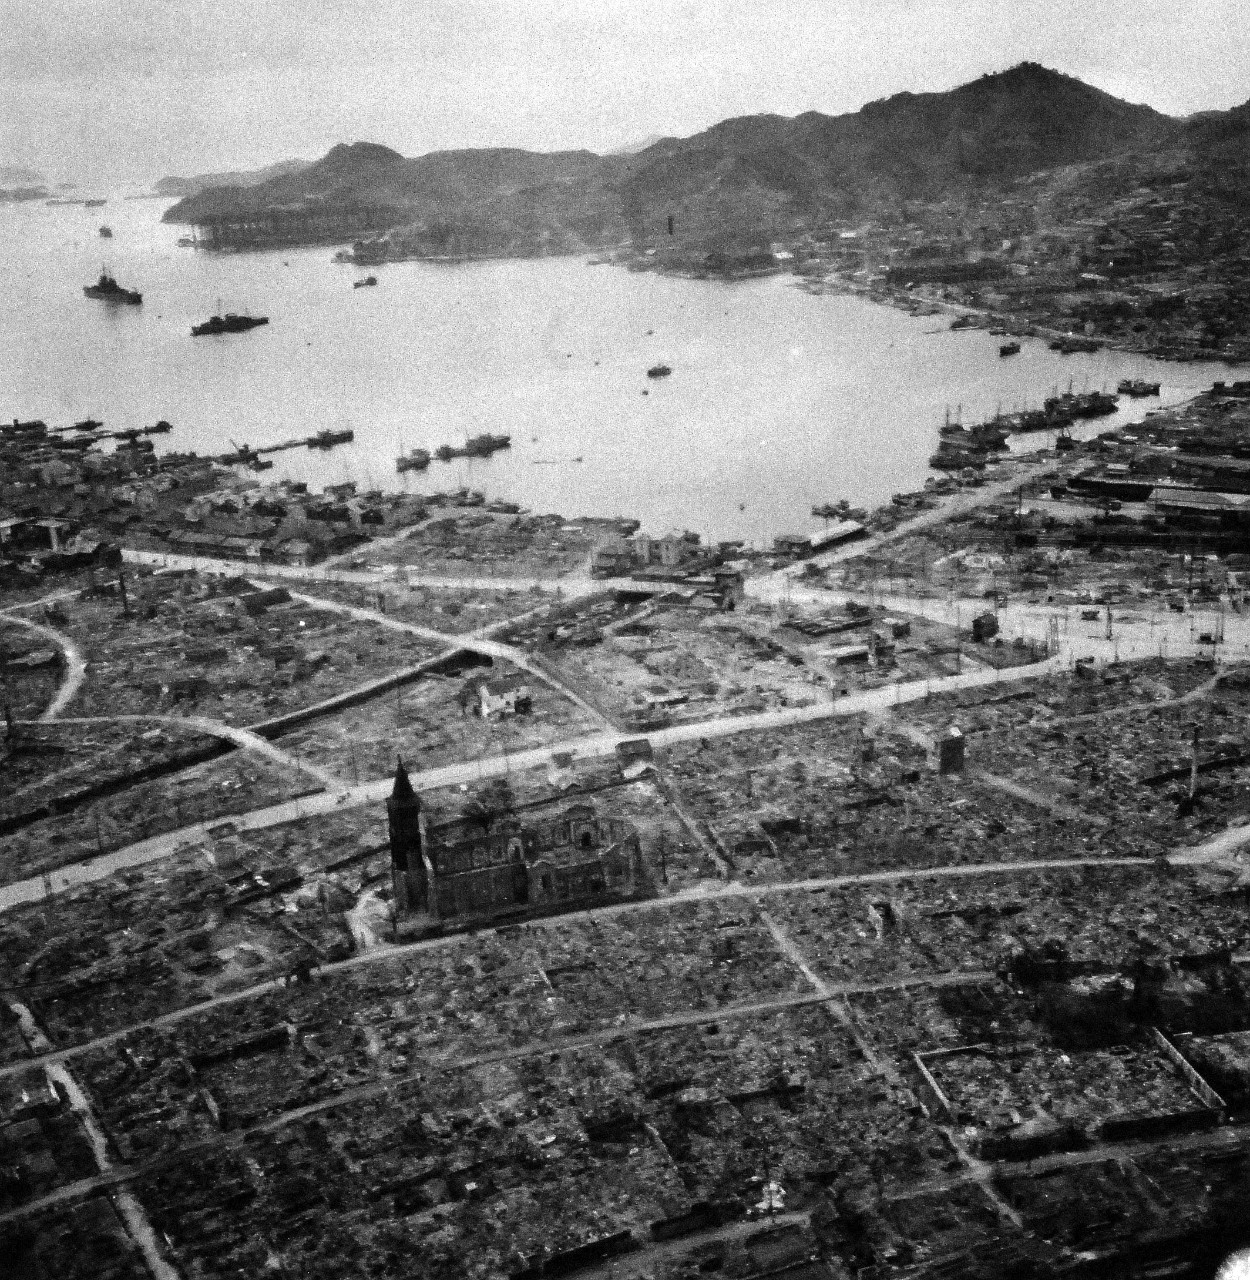 80-G-264906:   Nagasaki, Japan, 1945.   Aerial view of the bomb damage from August 9, 1945.  Altitude of 300’.  Photographed by USS Chenango (CVE-28) aircraft on October 15, 1945.  Official U.S. Navy photograph, now in the collections of the National Archives.   (2015/12/01).